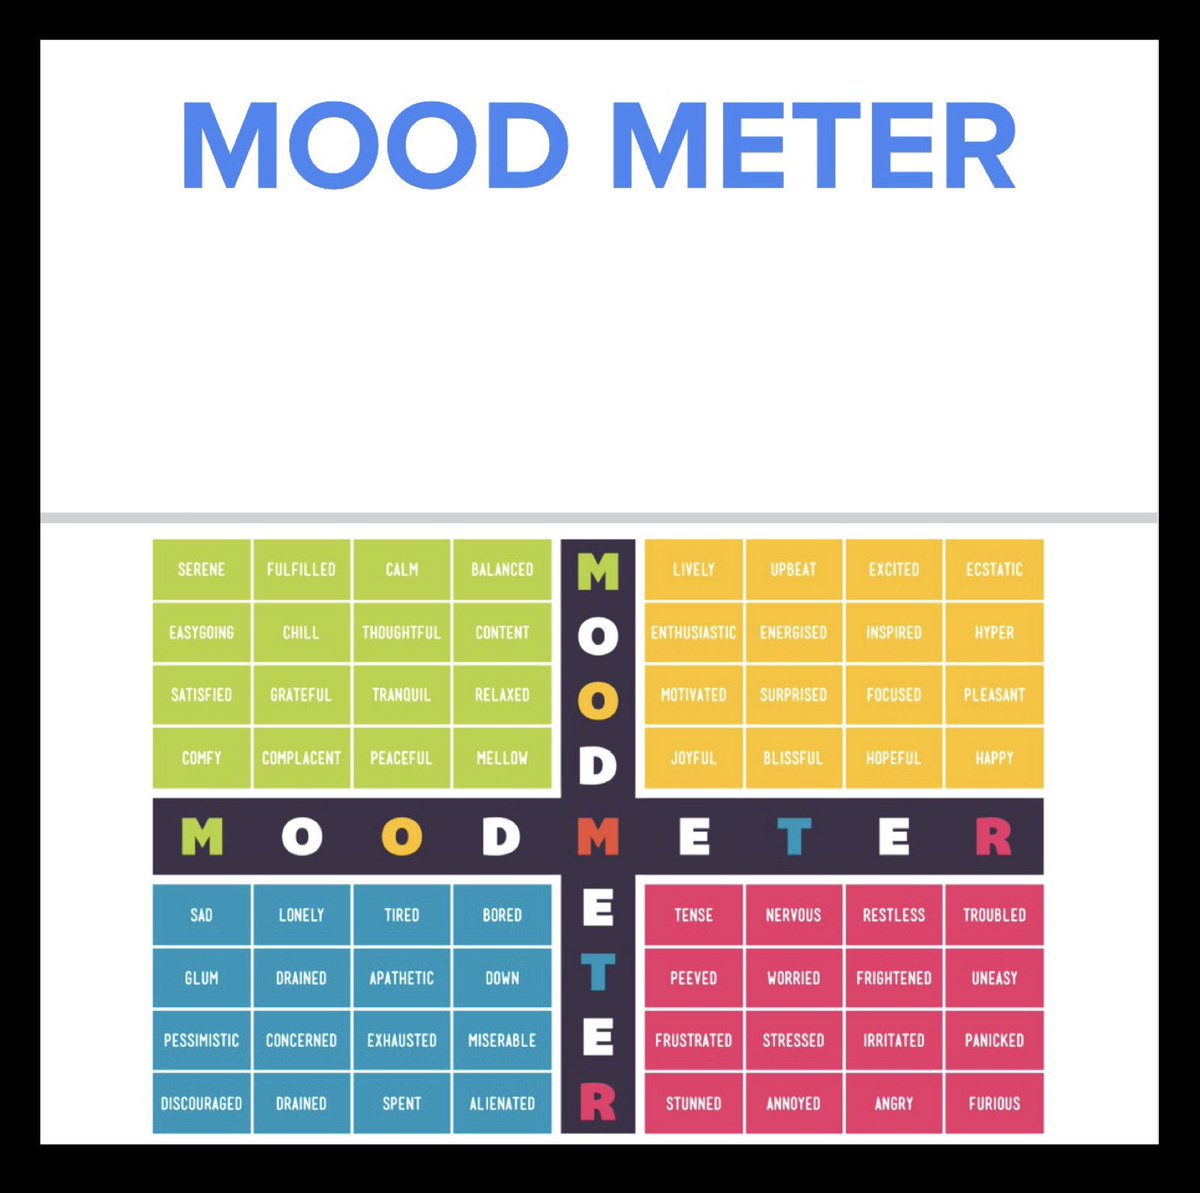 Gr. 7 Ss @ValleyParkMS starting the day off in #communitycircles discussing their #emotions on the #moodmeter & sharing strategies on how to either stay in your current emotion or how to shift - #emotionalintelligence - @LN10Alvarez @LC2_TDSB @schan_tdsb #MentalHealthMatters